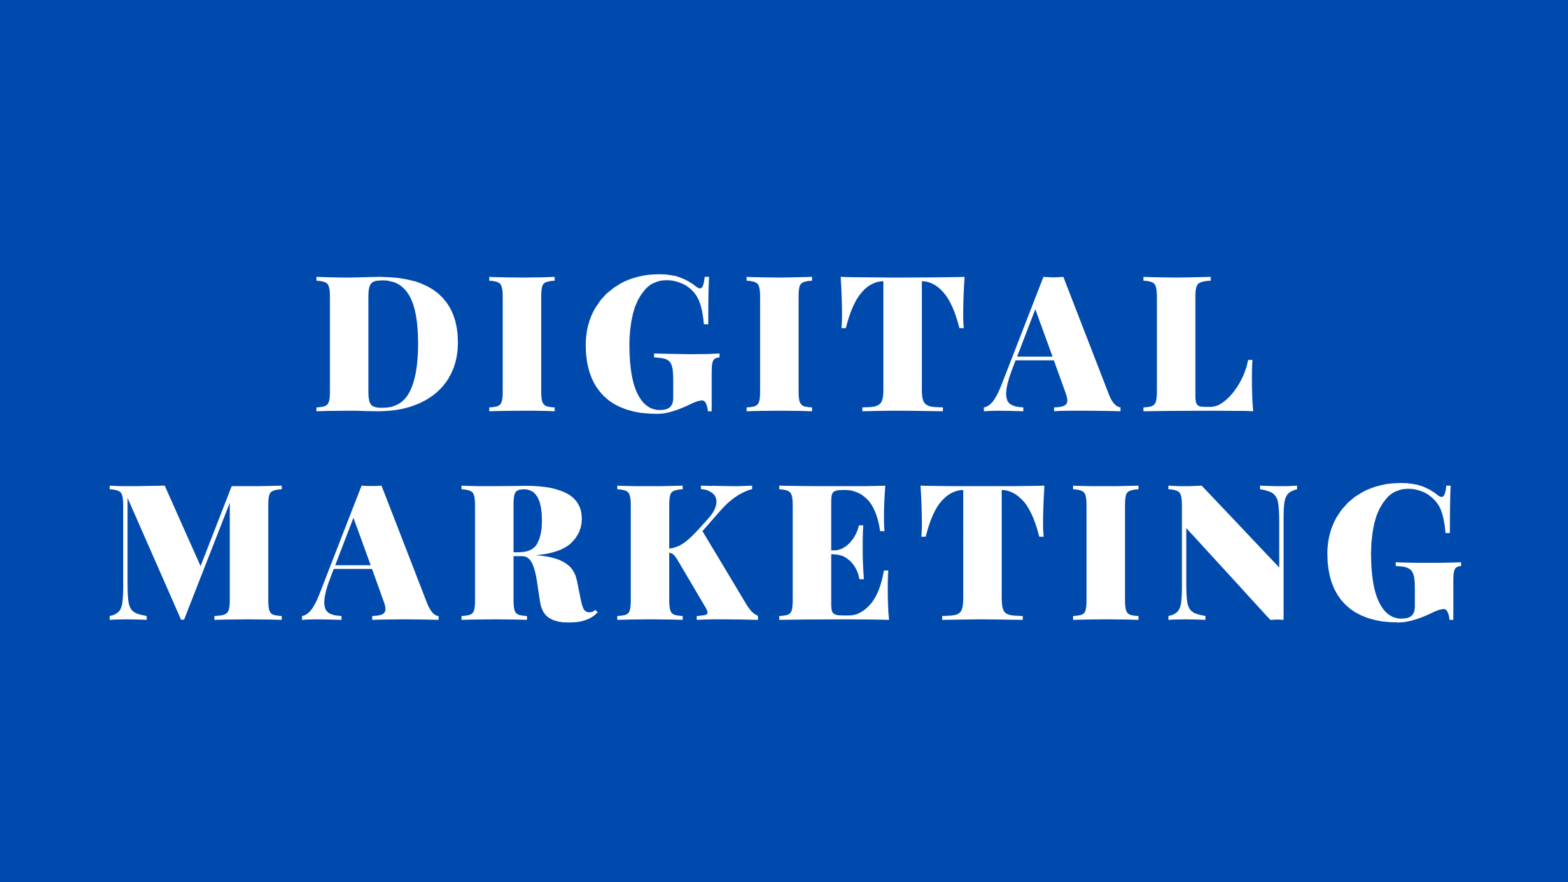 Is Digital Marketing a good career option to start with?